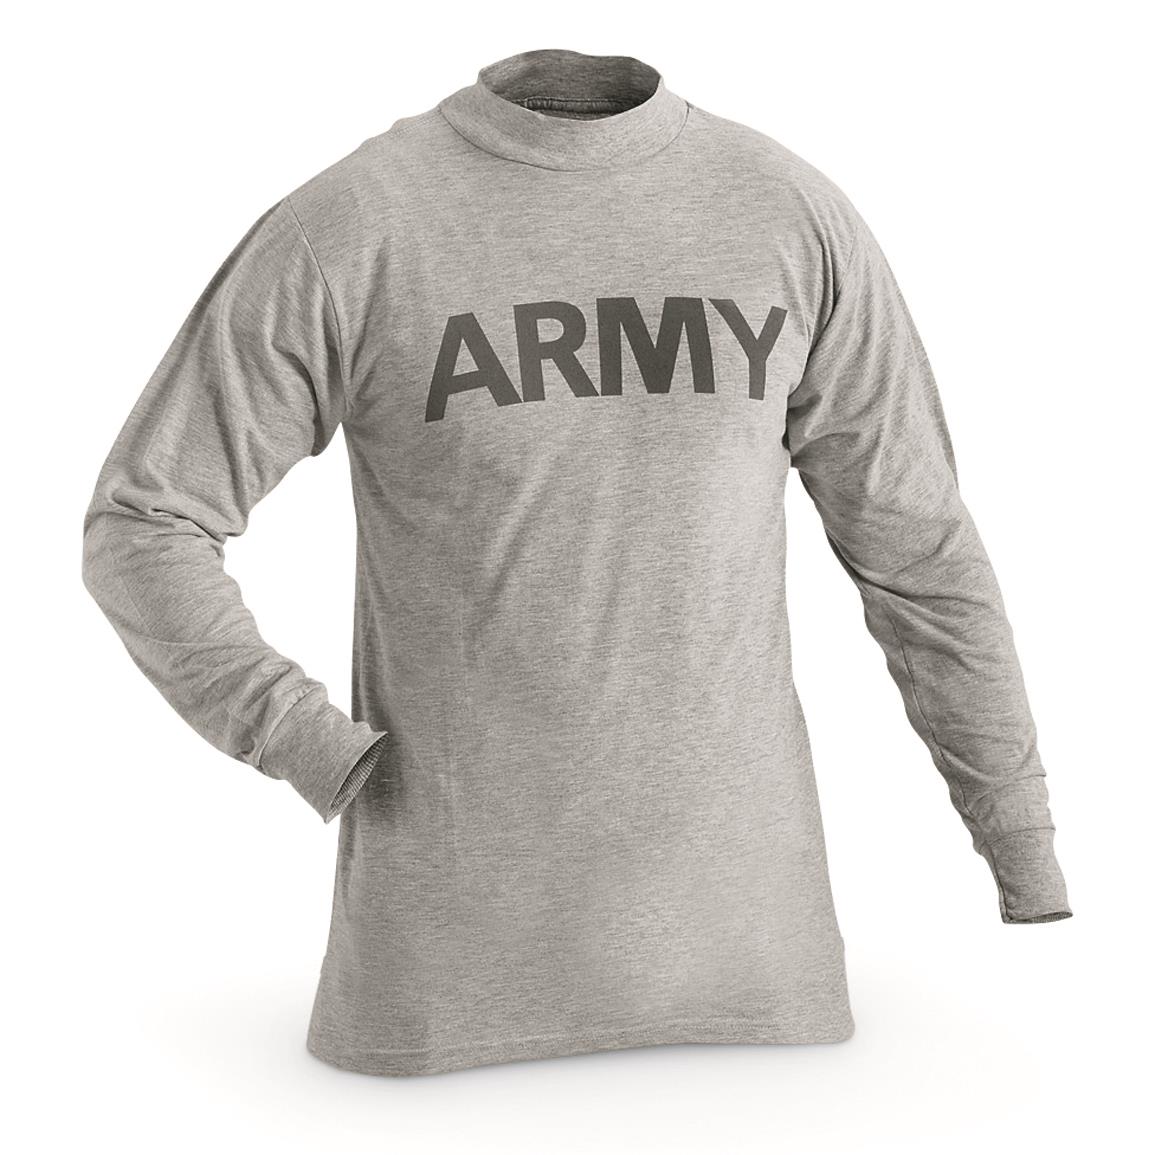 U.S. Army Surplus Long Sleeve T-Shirts, 2 pack, New